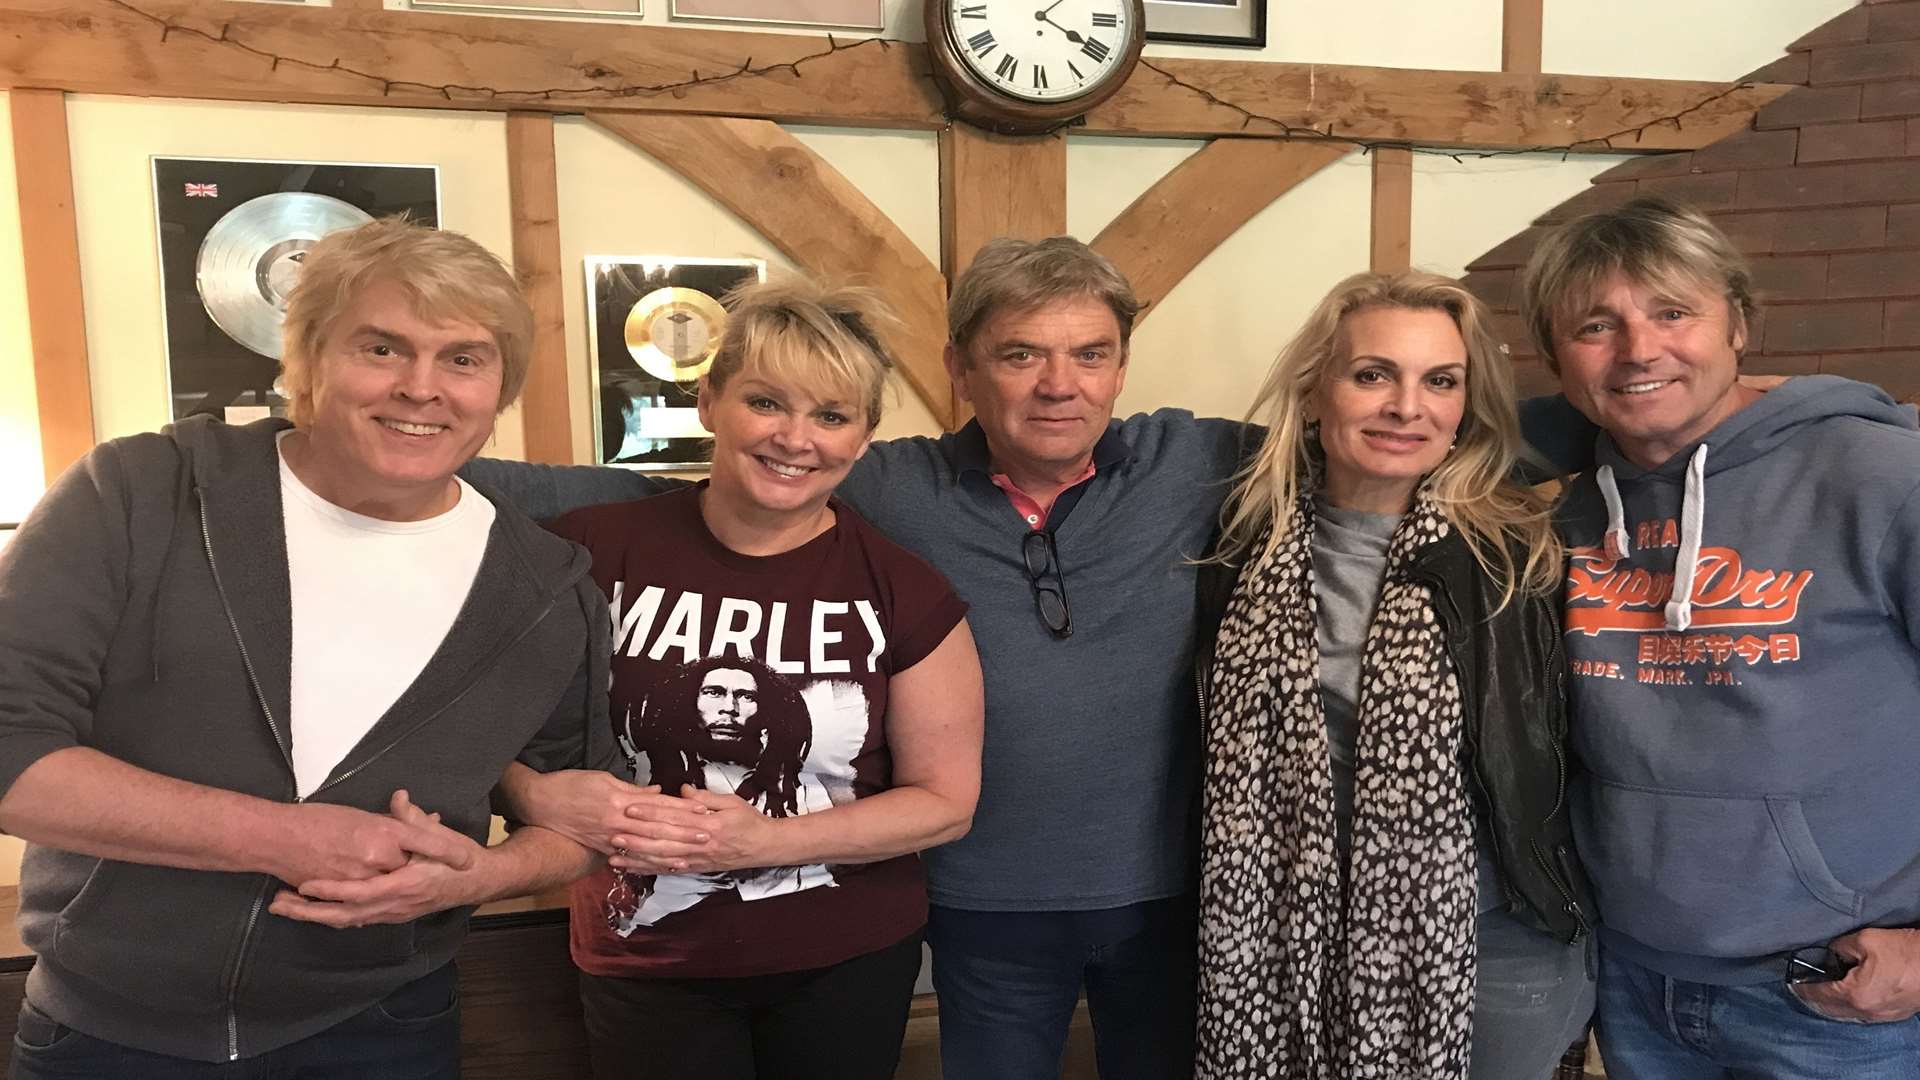 The Fizz band members with record producer Mike Stock (from left): Mike Nolan, Cheryl Baker, Mike Stock, Jay Aston and Bobby McVay. Picture: PA Photo/MPG Records.